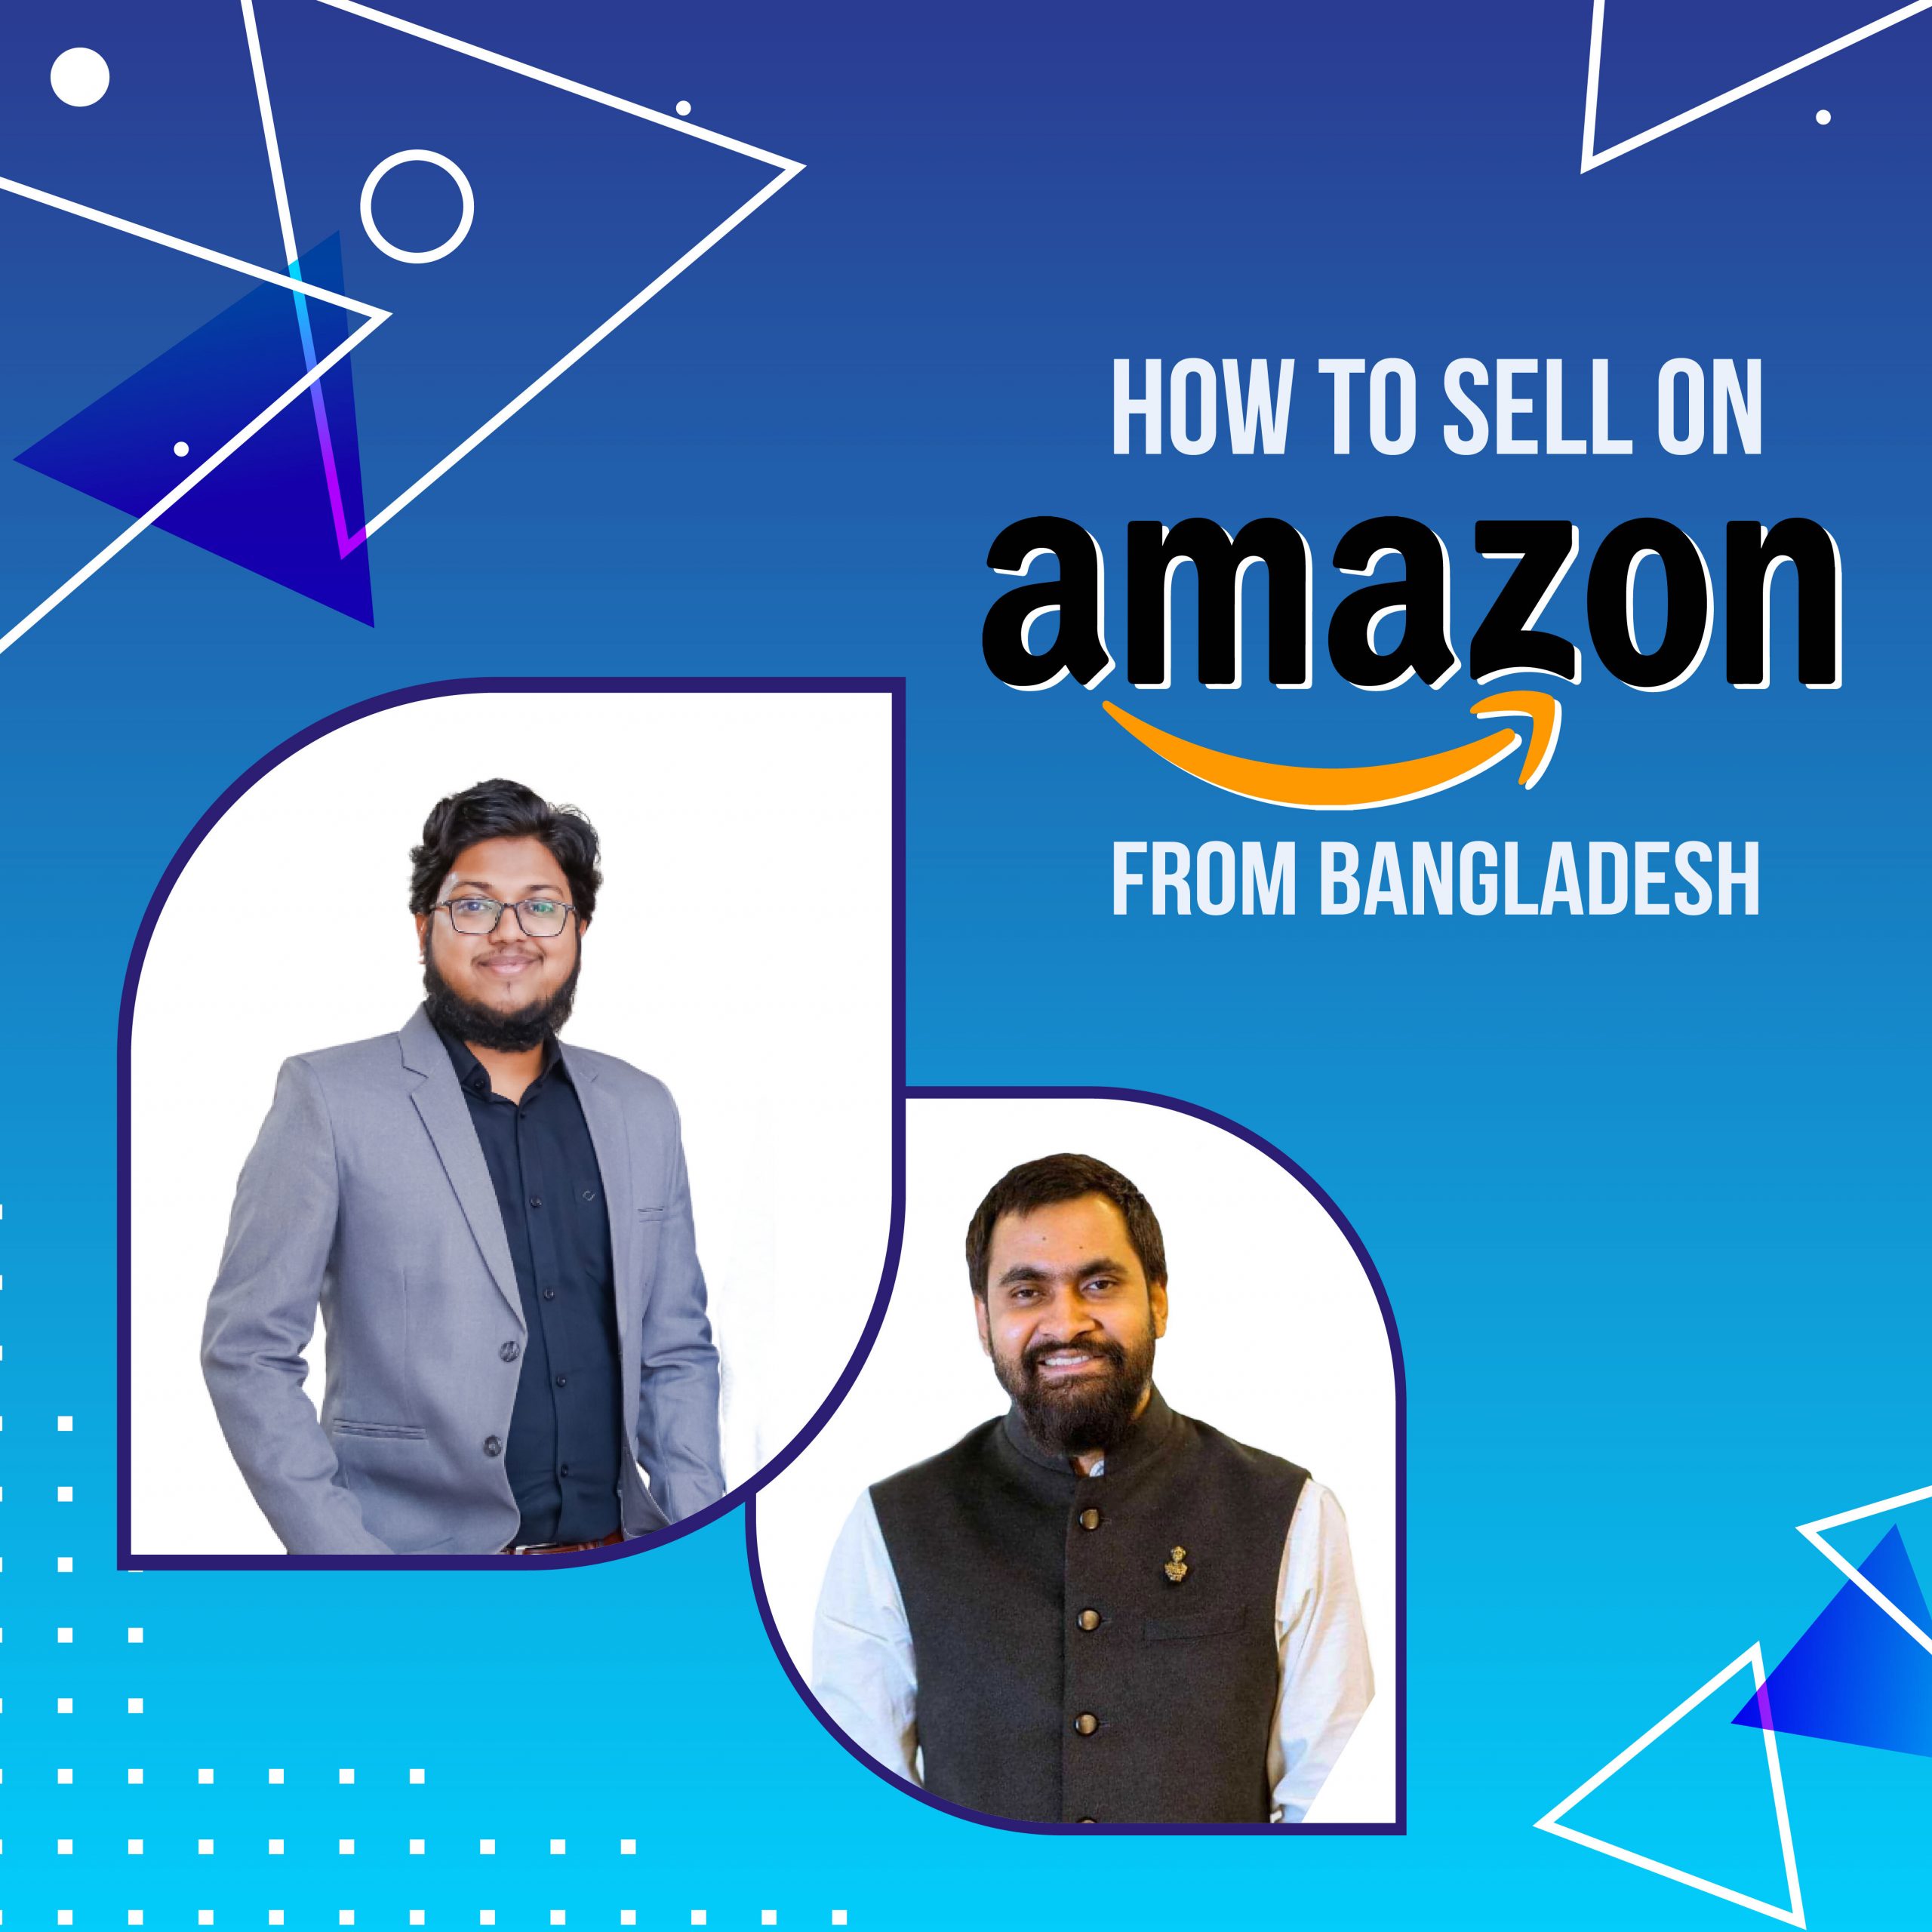 How to Sell on Amazon From Bangladesh